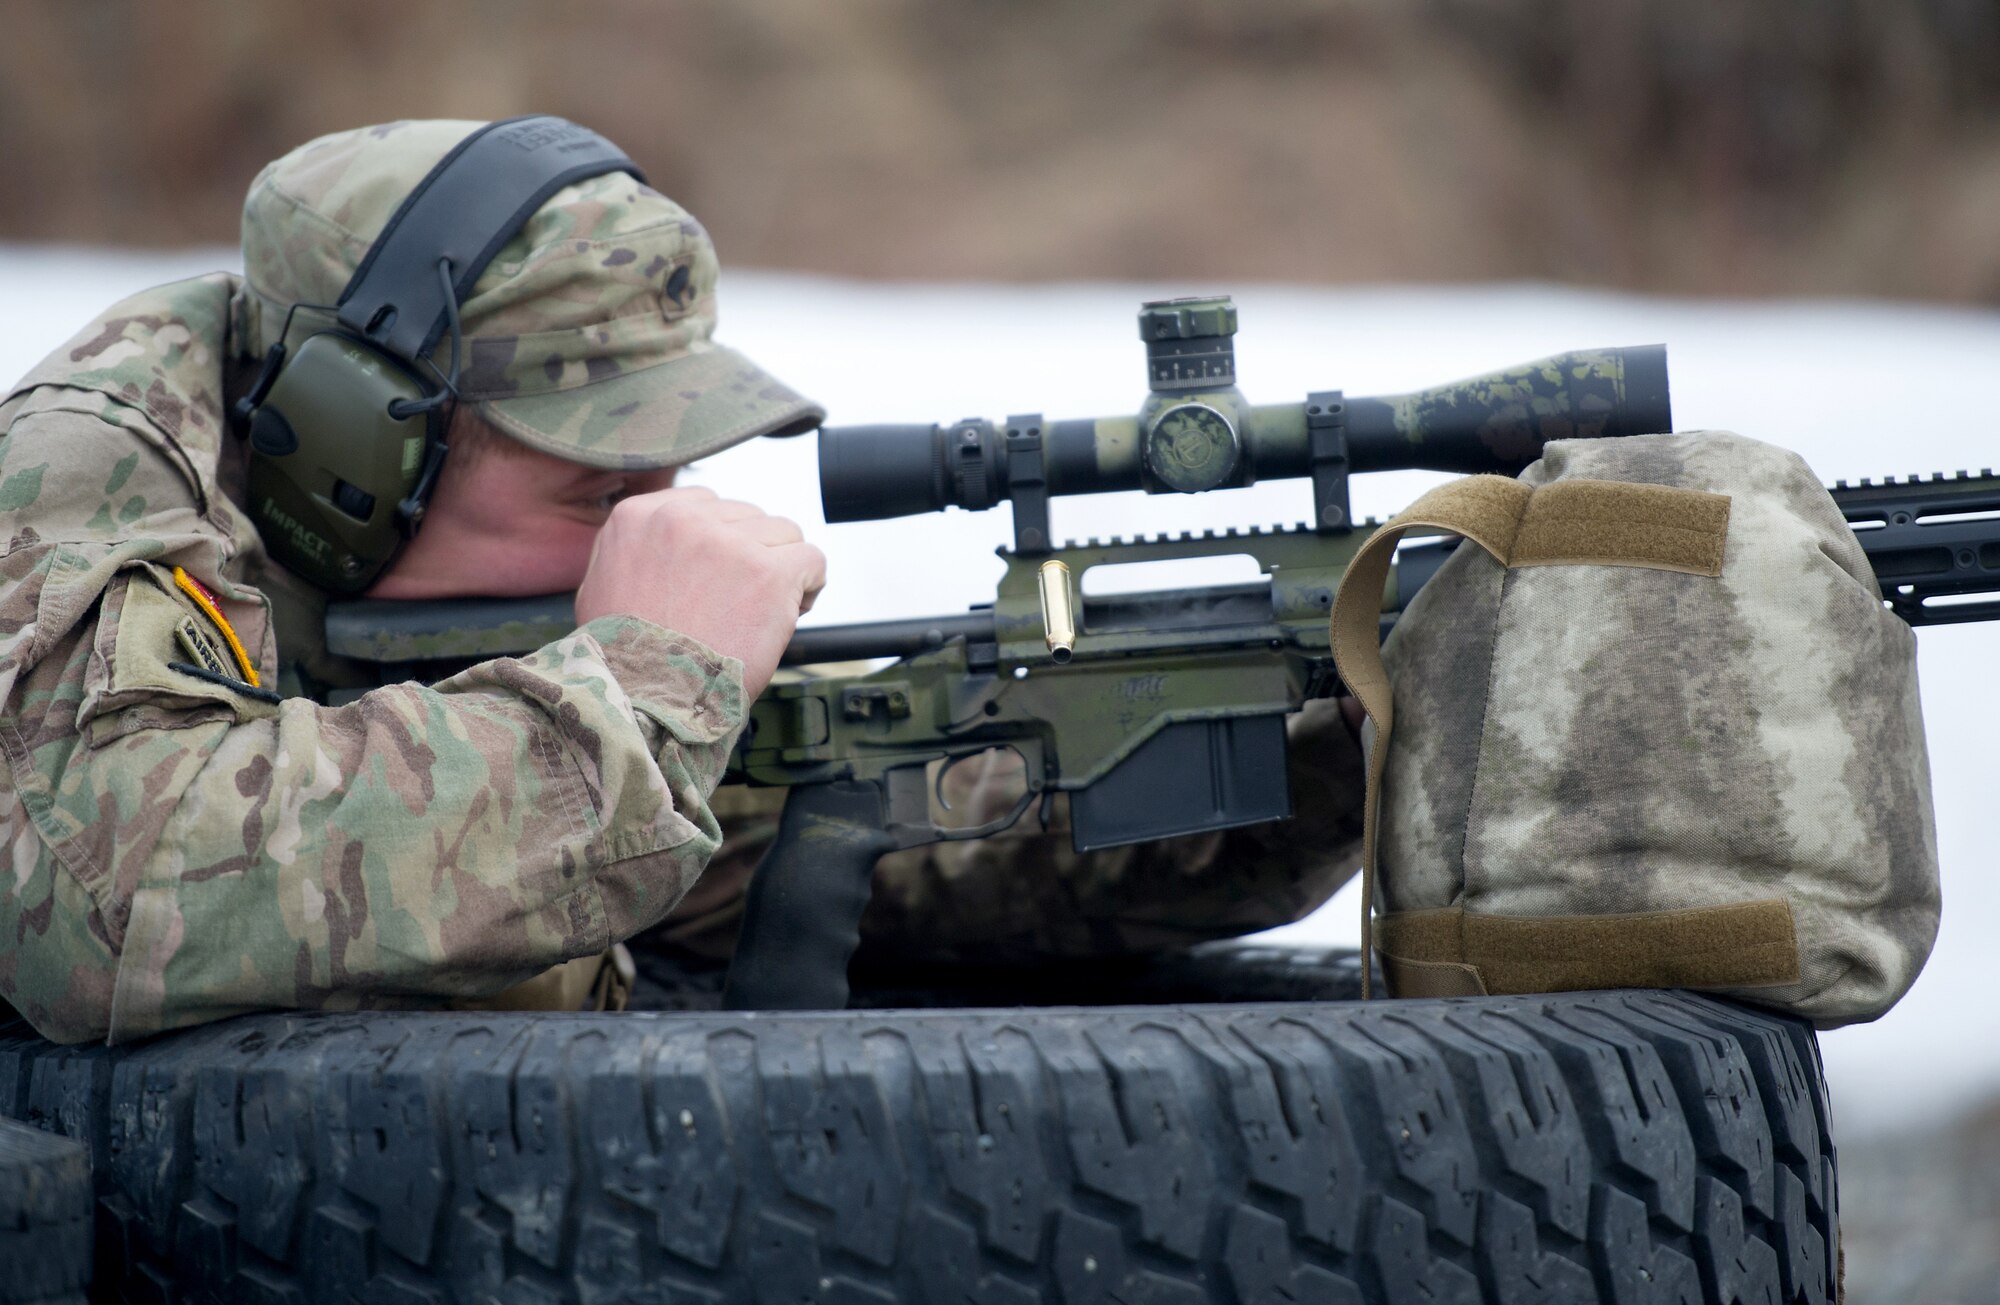 Army Spc. Eric Haugh, a native of Graham, Wash., assigned to Charlie Troop, 1st Squadron, 40th Cavalry Regiment (Airborne), 4th Infantry Brigade Combat Team (Airborne), 25th Infantry Division, U.S. Army Alaska, ejects a cartridge from his M2010 Enhanced Sniper Rifle on Statler range at Joint Base Elmendorf-Richardson, Alaska, April 6, 2018, during marksmanship training.  A sniper's main responsibility is to deliver discriminatory, highly accurate rifle fire against enemy targets that cannot be engaged successfully by the regular rifleman due to range, size, location, fleeting nature, or visibility.